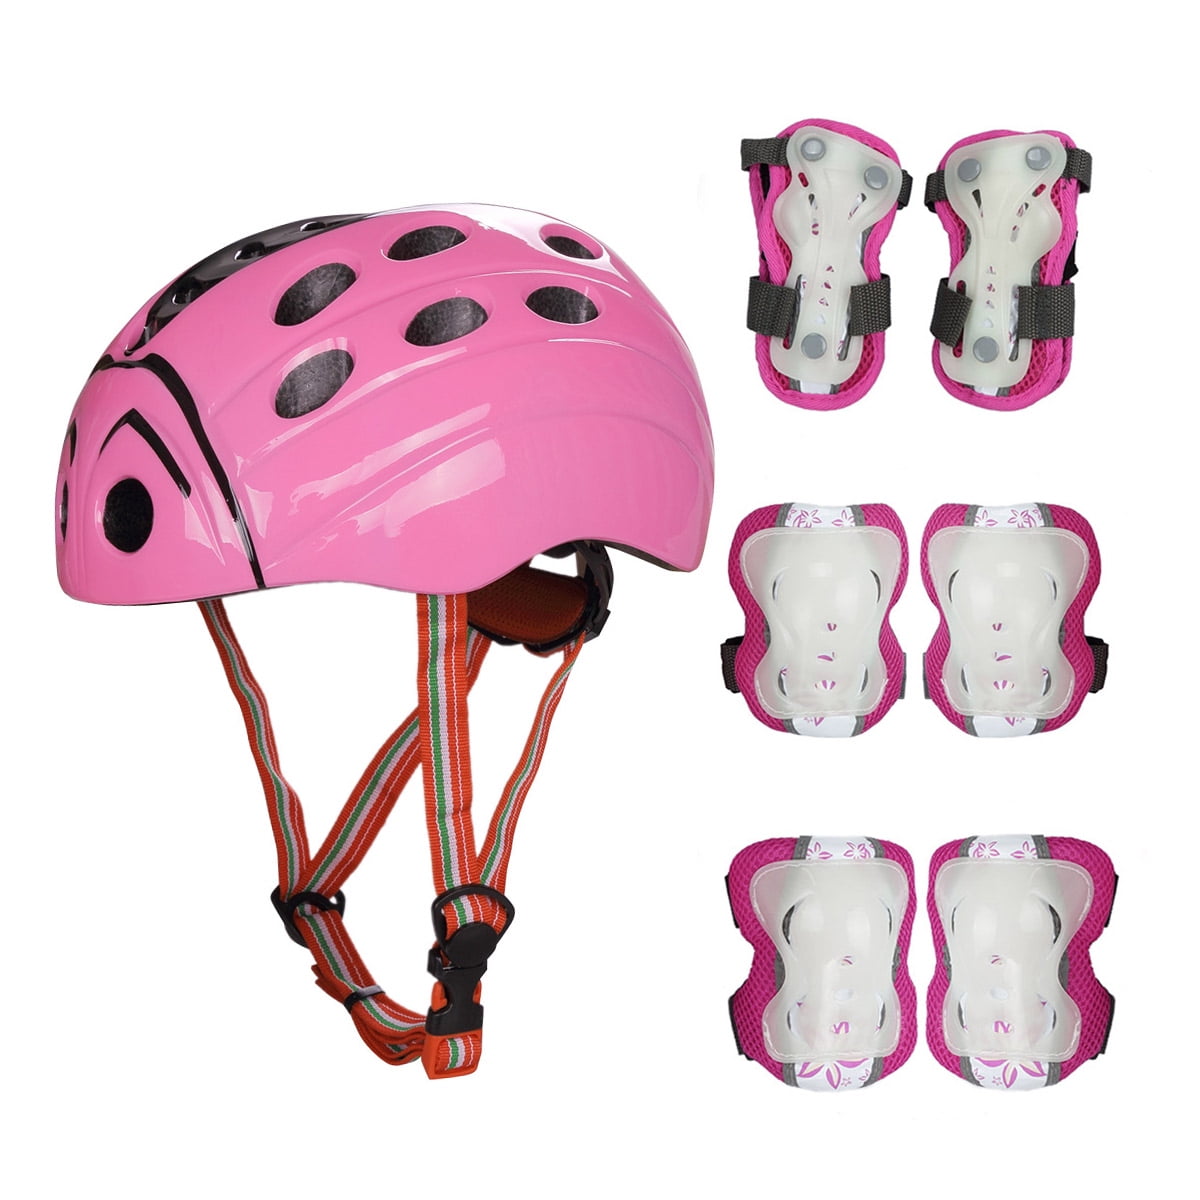 Sporting Goods Frozen Kids Activities Helmet Knee And Elbow Pads Protection Set Small X Small Sporting Goods Skateboarding Protective Gear